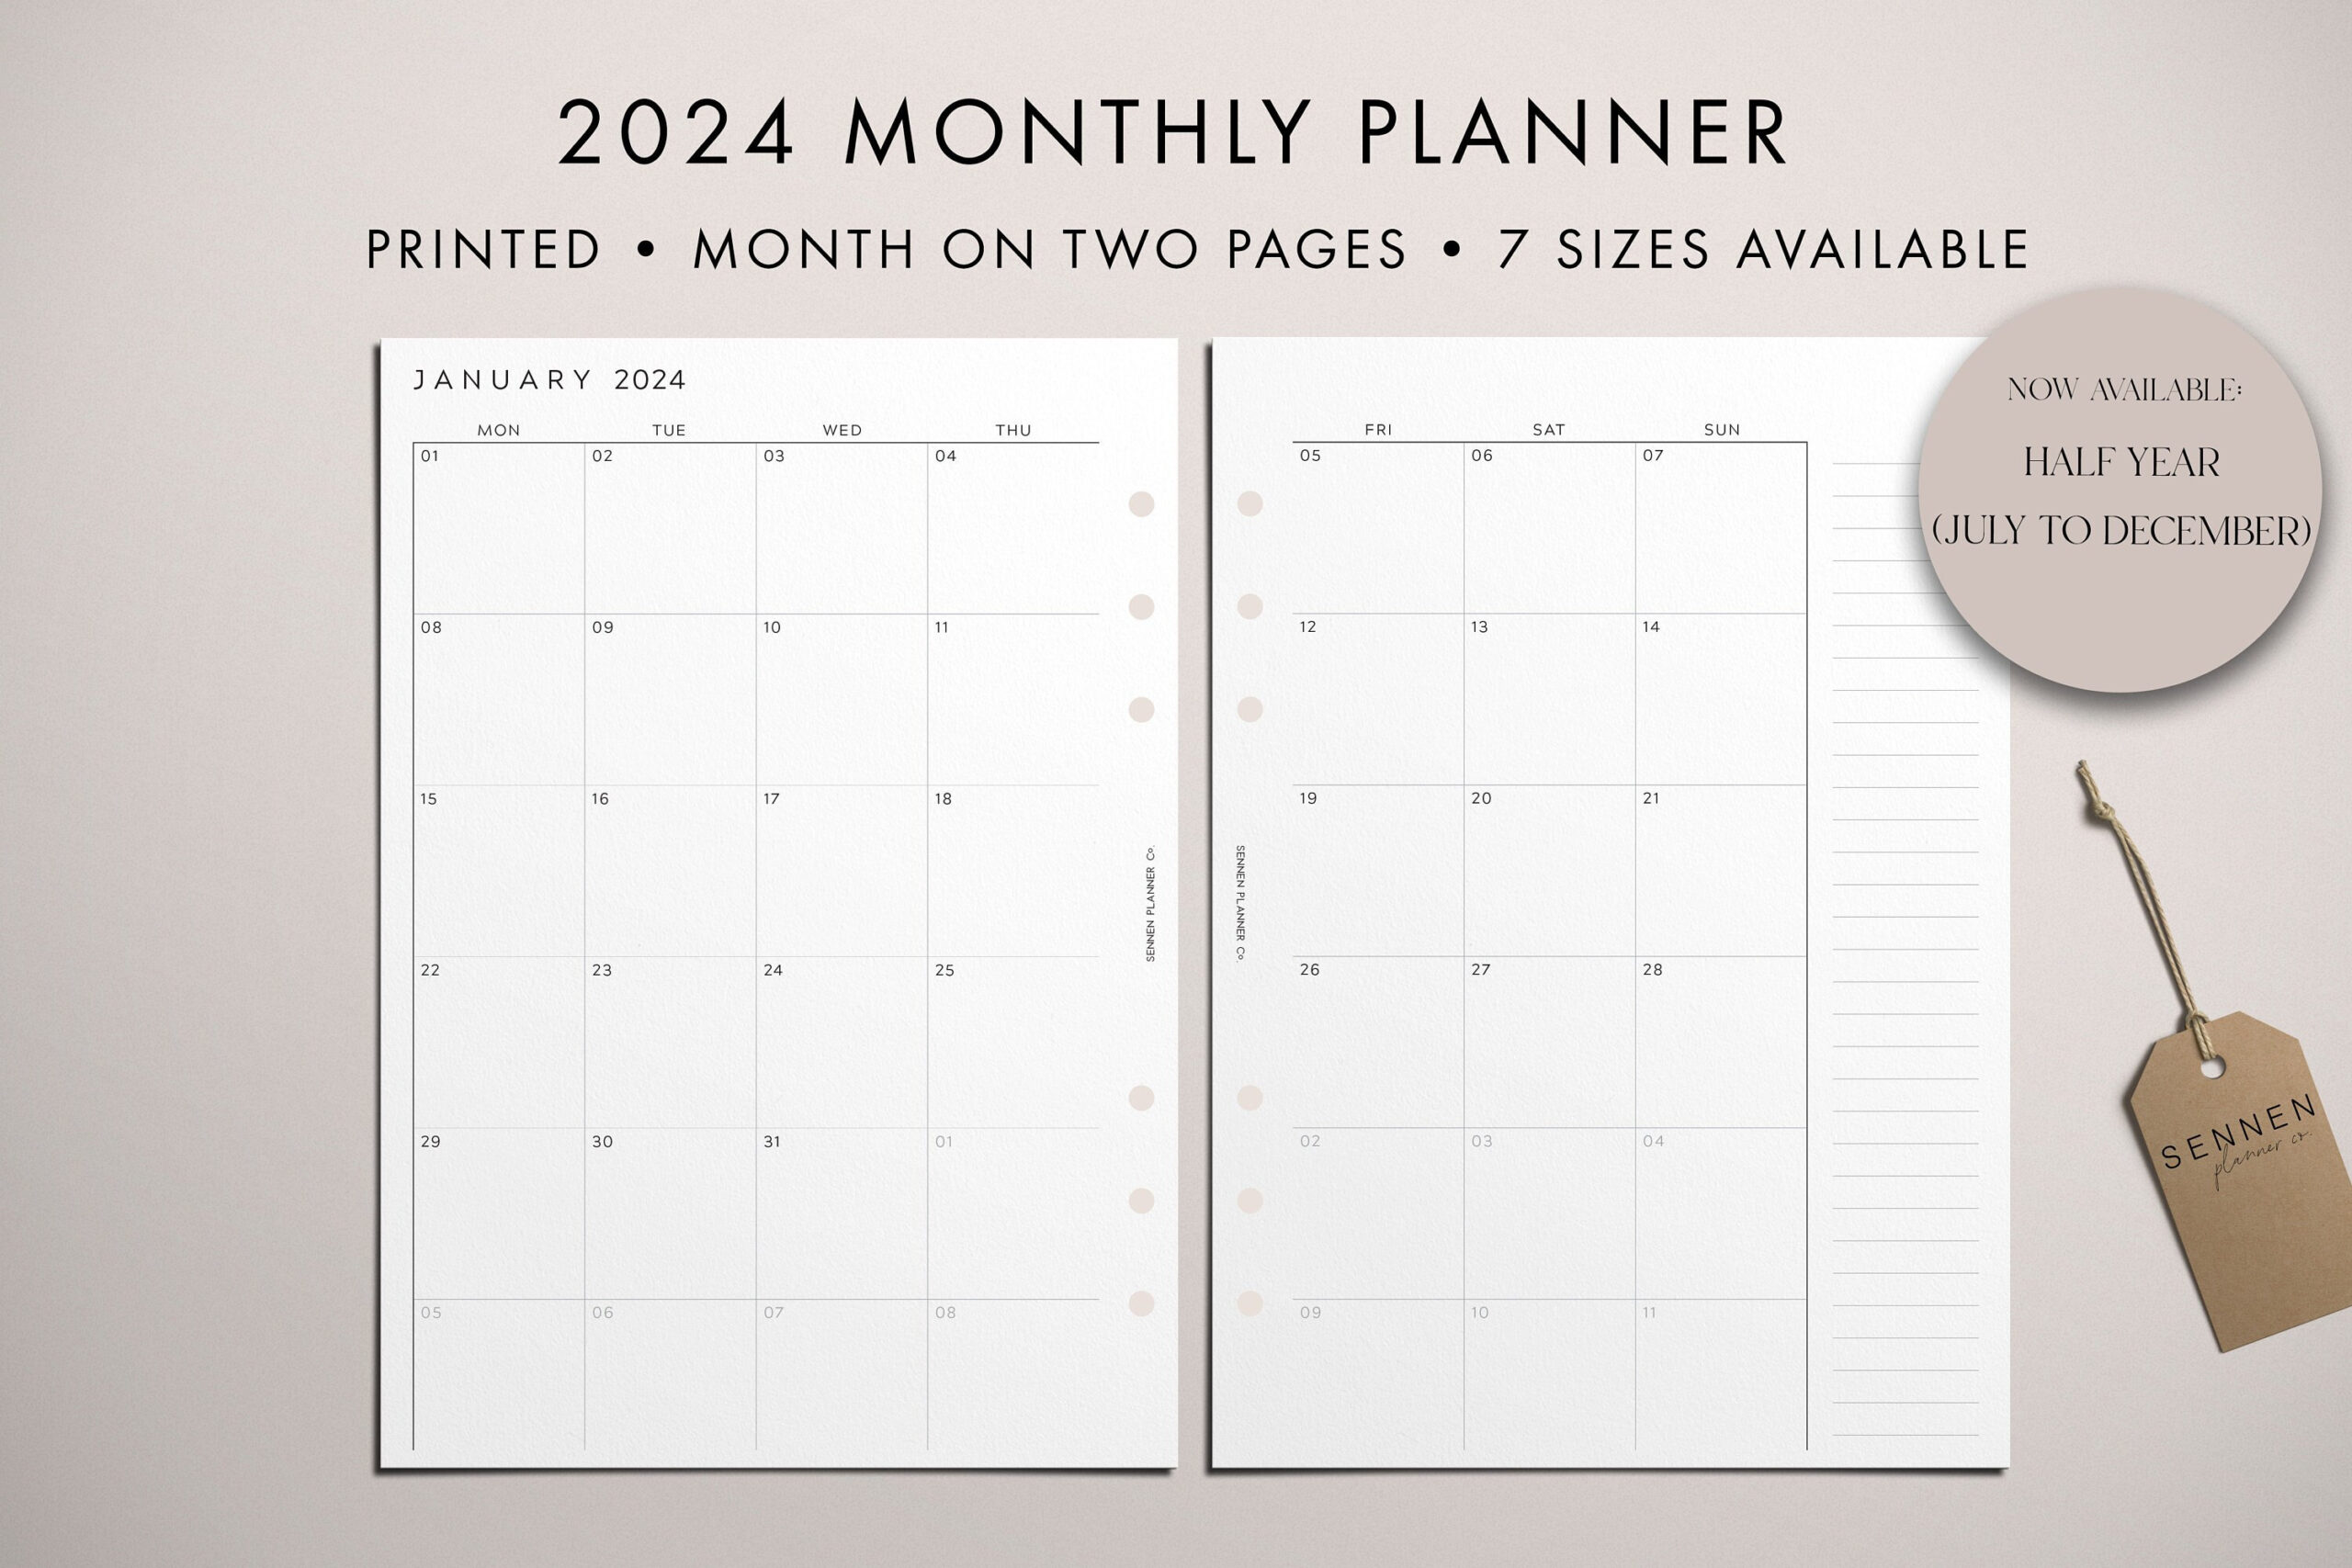 Printed 2024 Monthly Planner Insert V2, Month On Two Pages, Mo2P within Free Printable Calendar 2024 4 X 6.75 Planner